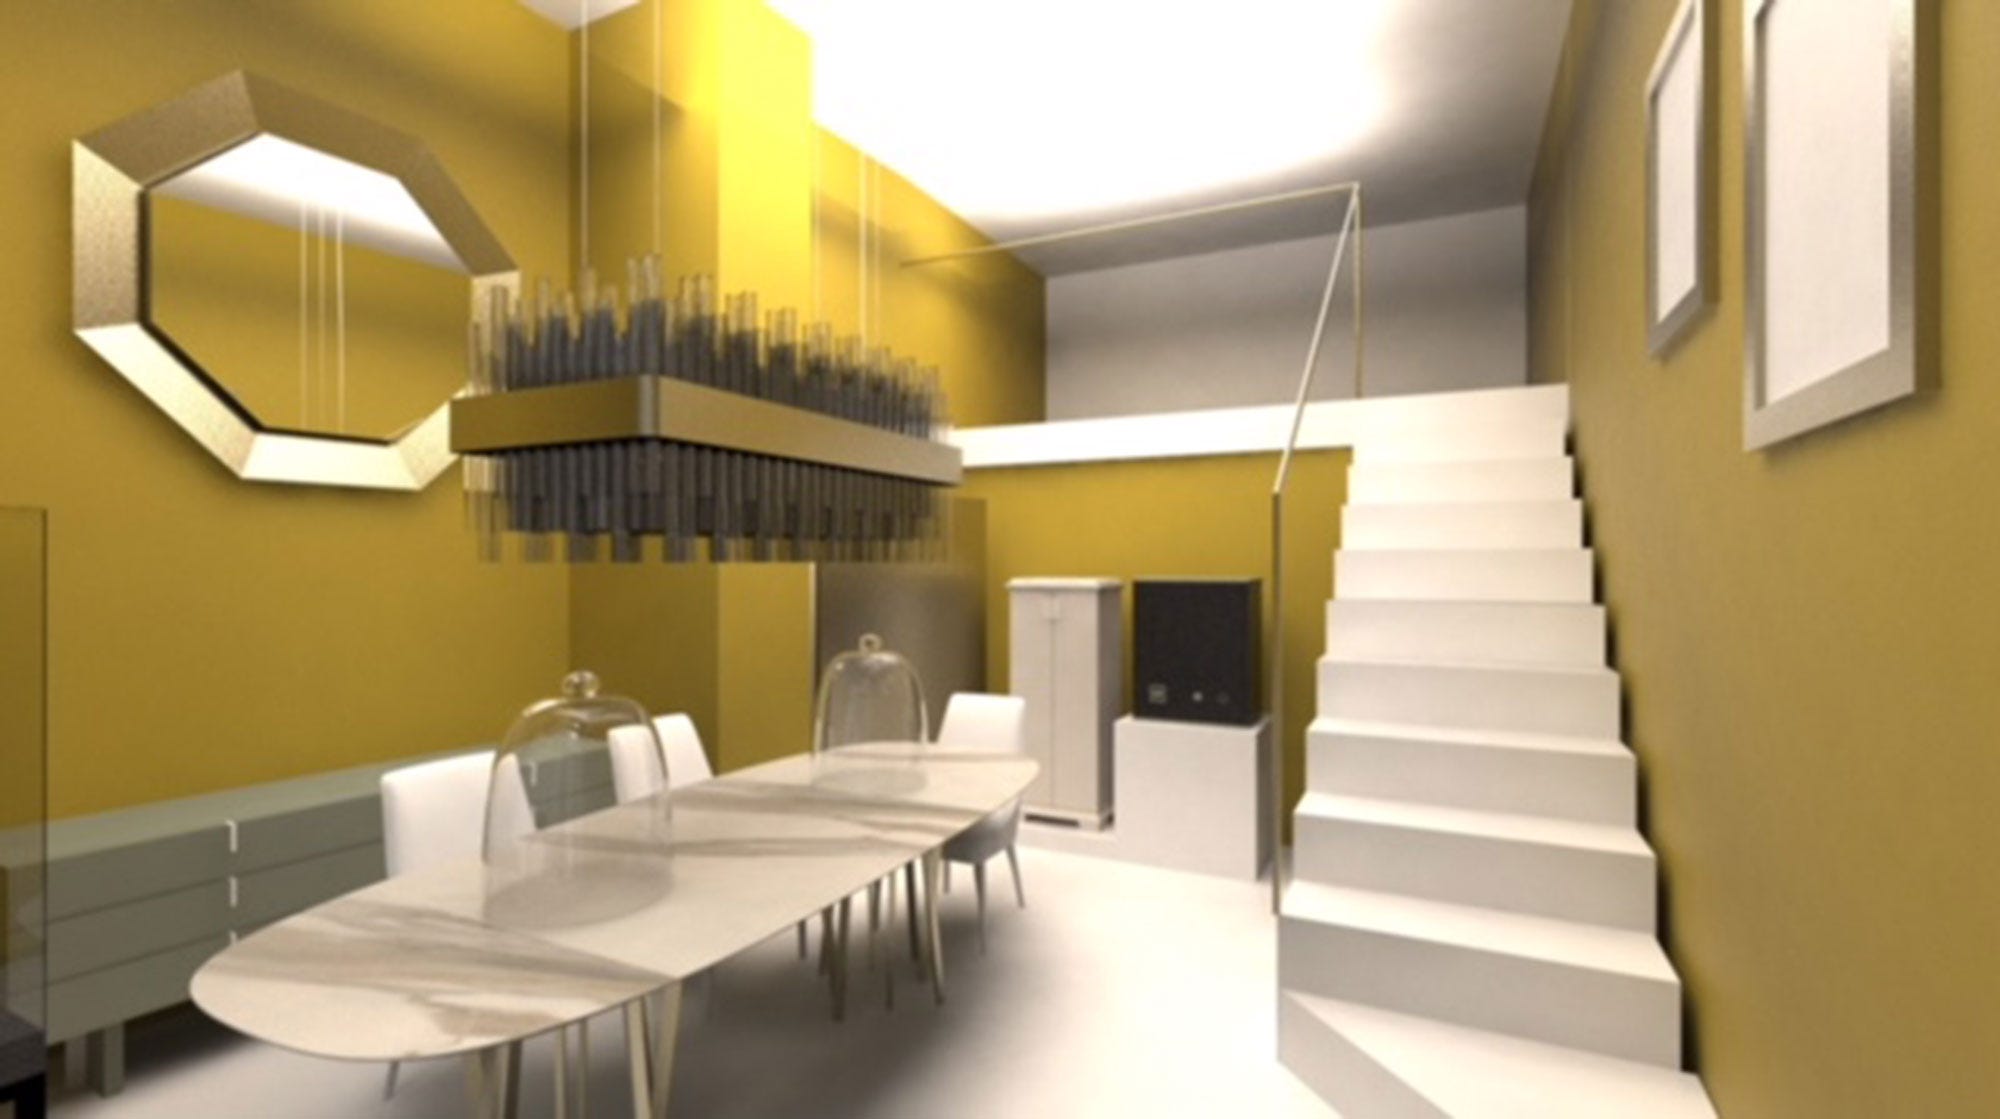 Interior design, Property, Building, Architecture, Room, Yellow, Design, House, Furniture, Ceiling, 